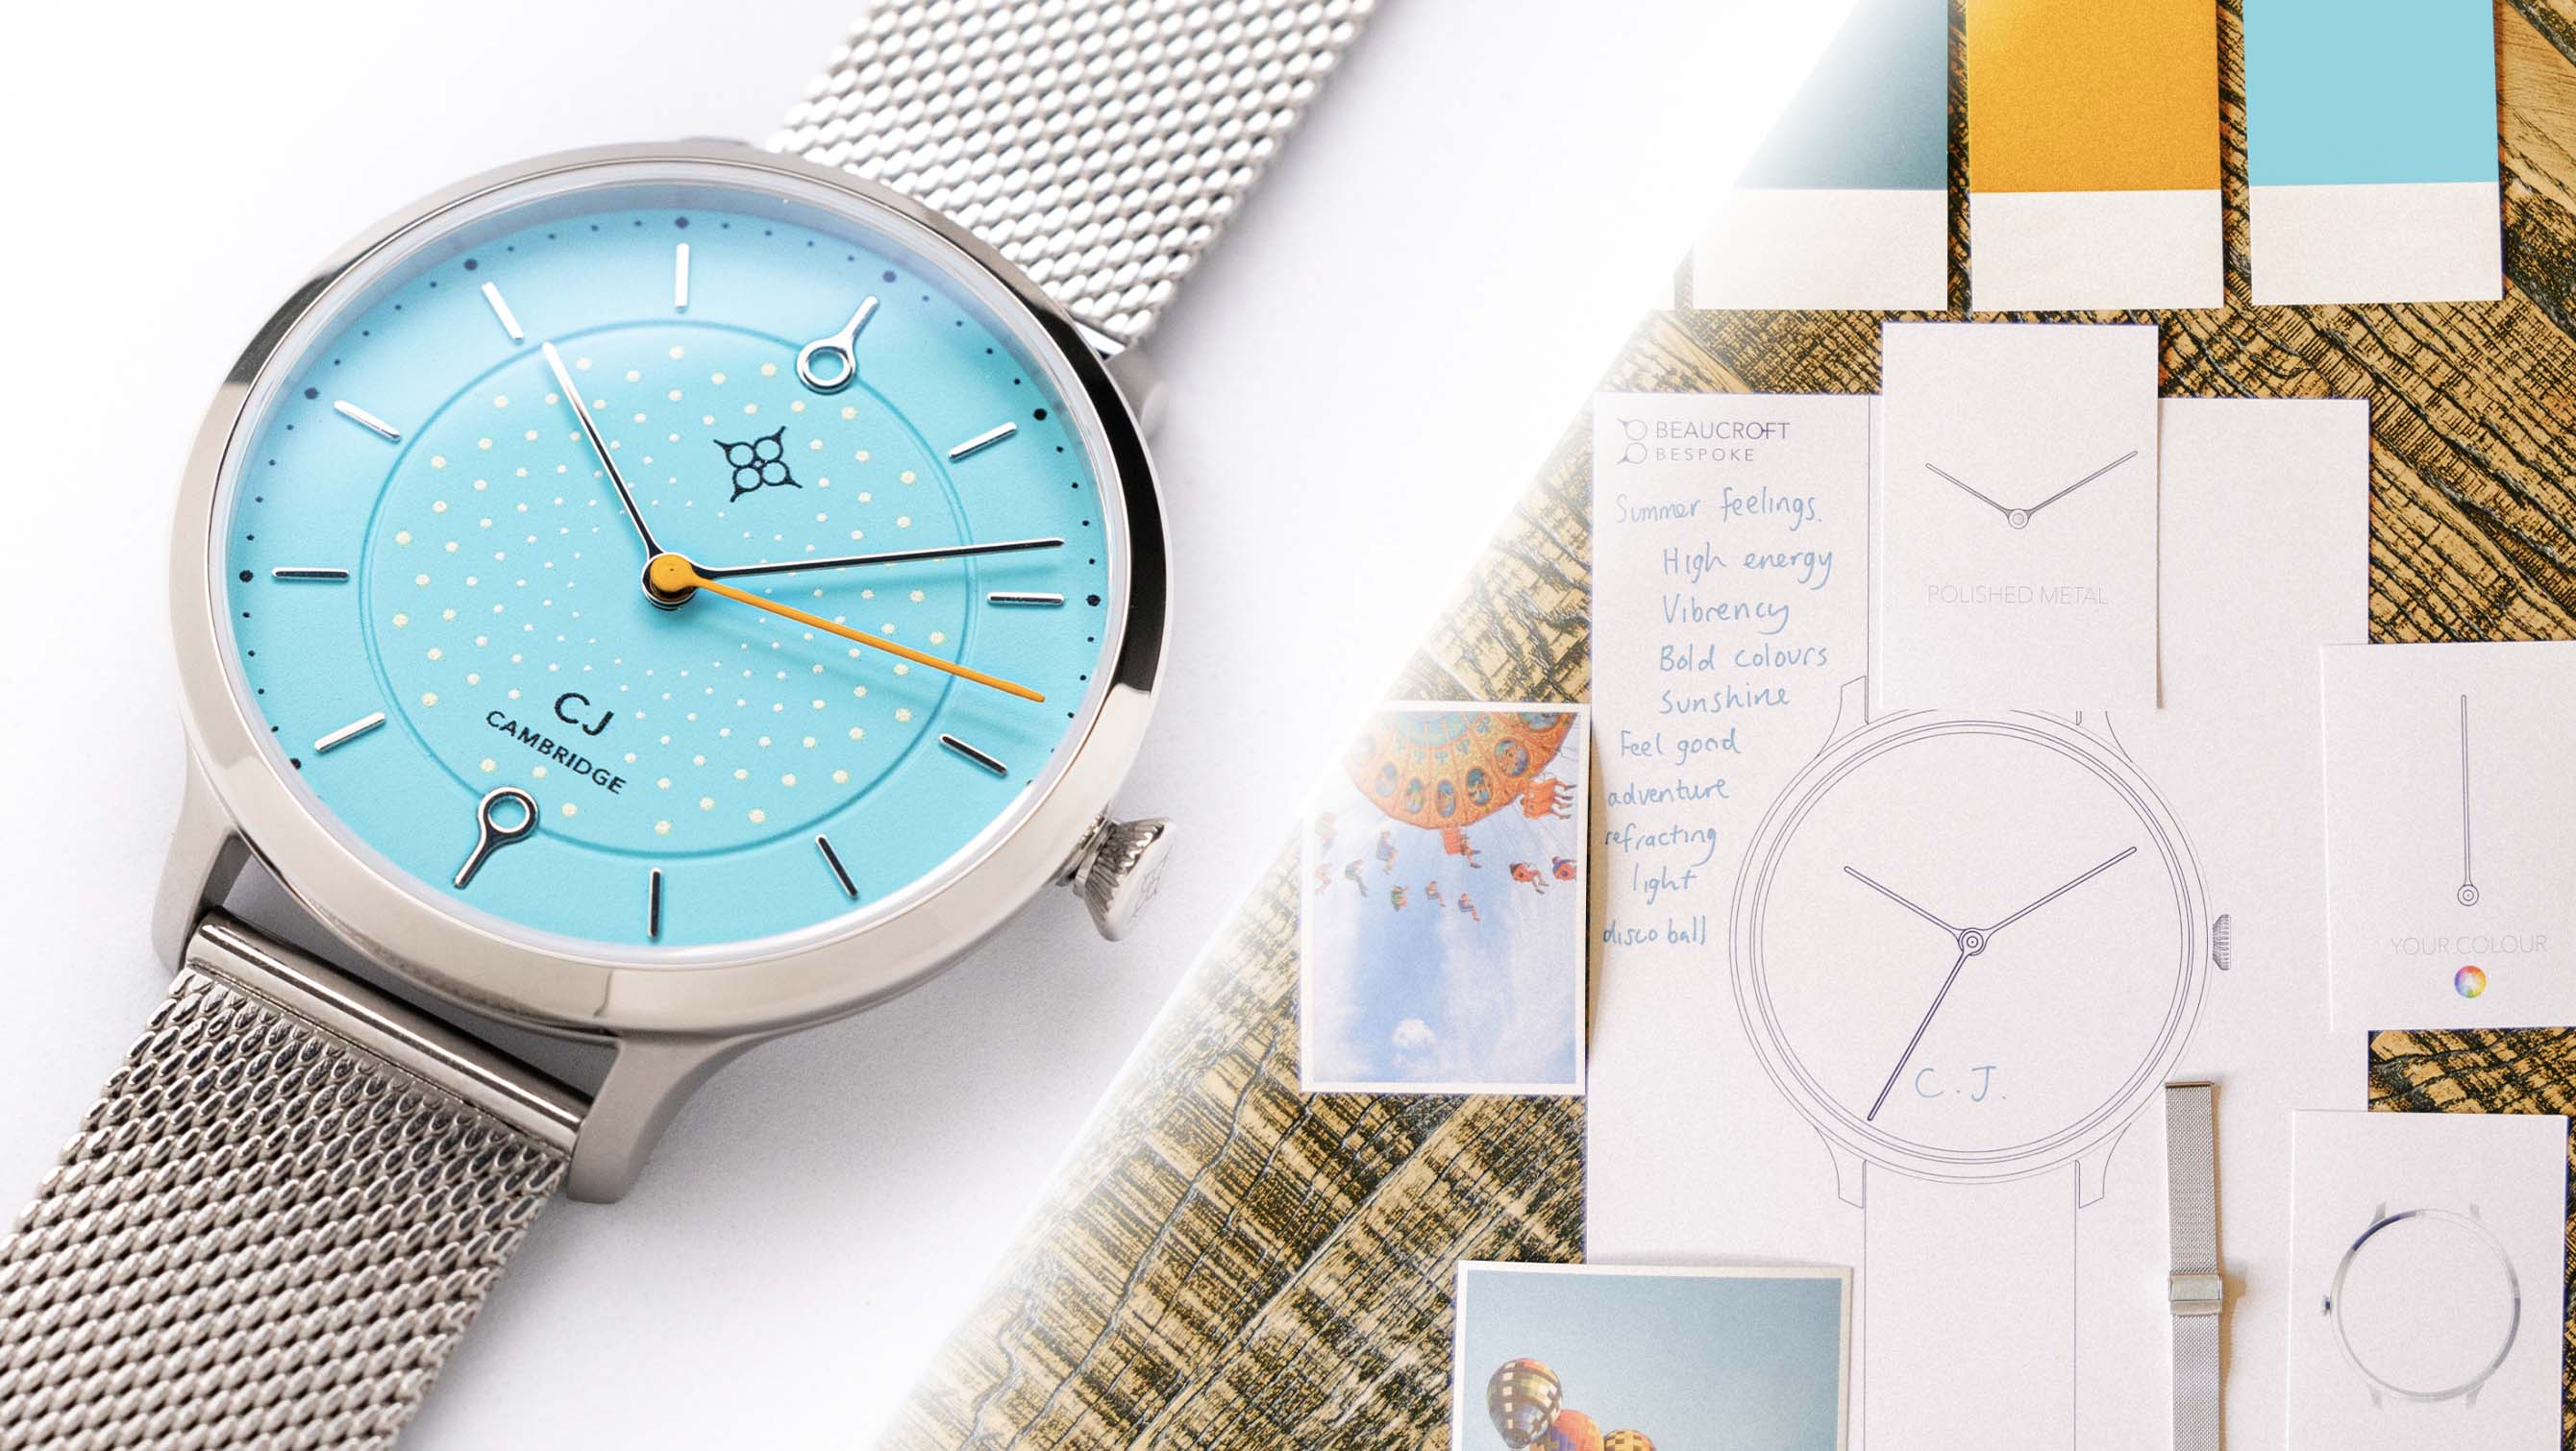 MICRO MONDAYS: The Beaucroft Bespoke allows you to design your own watch for an affordable price